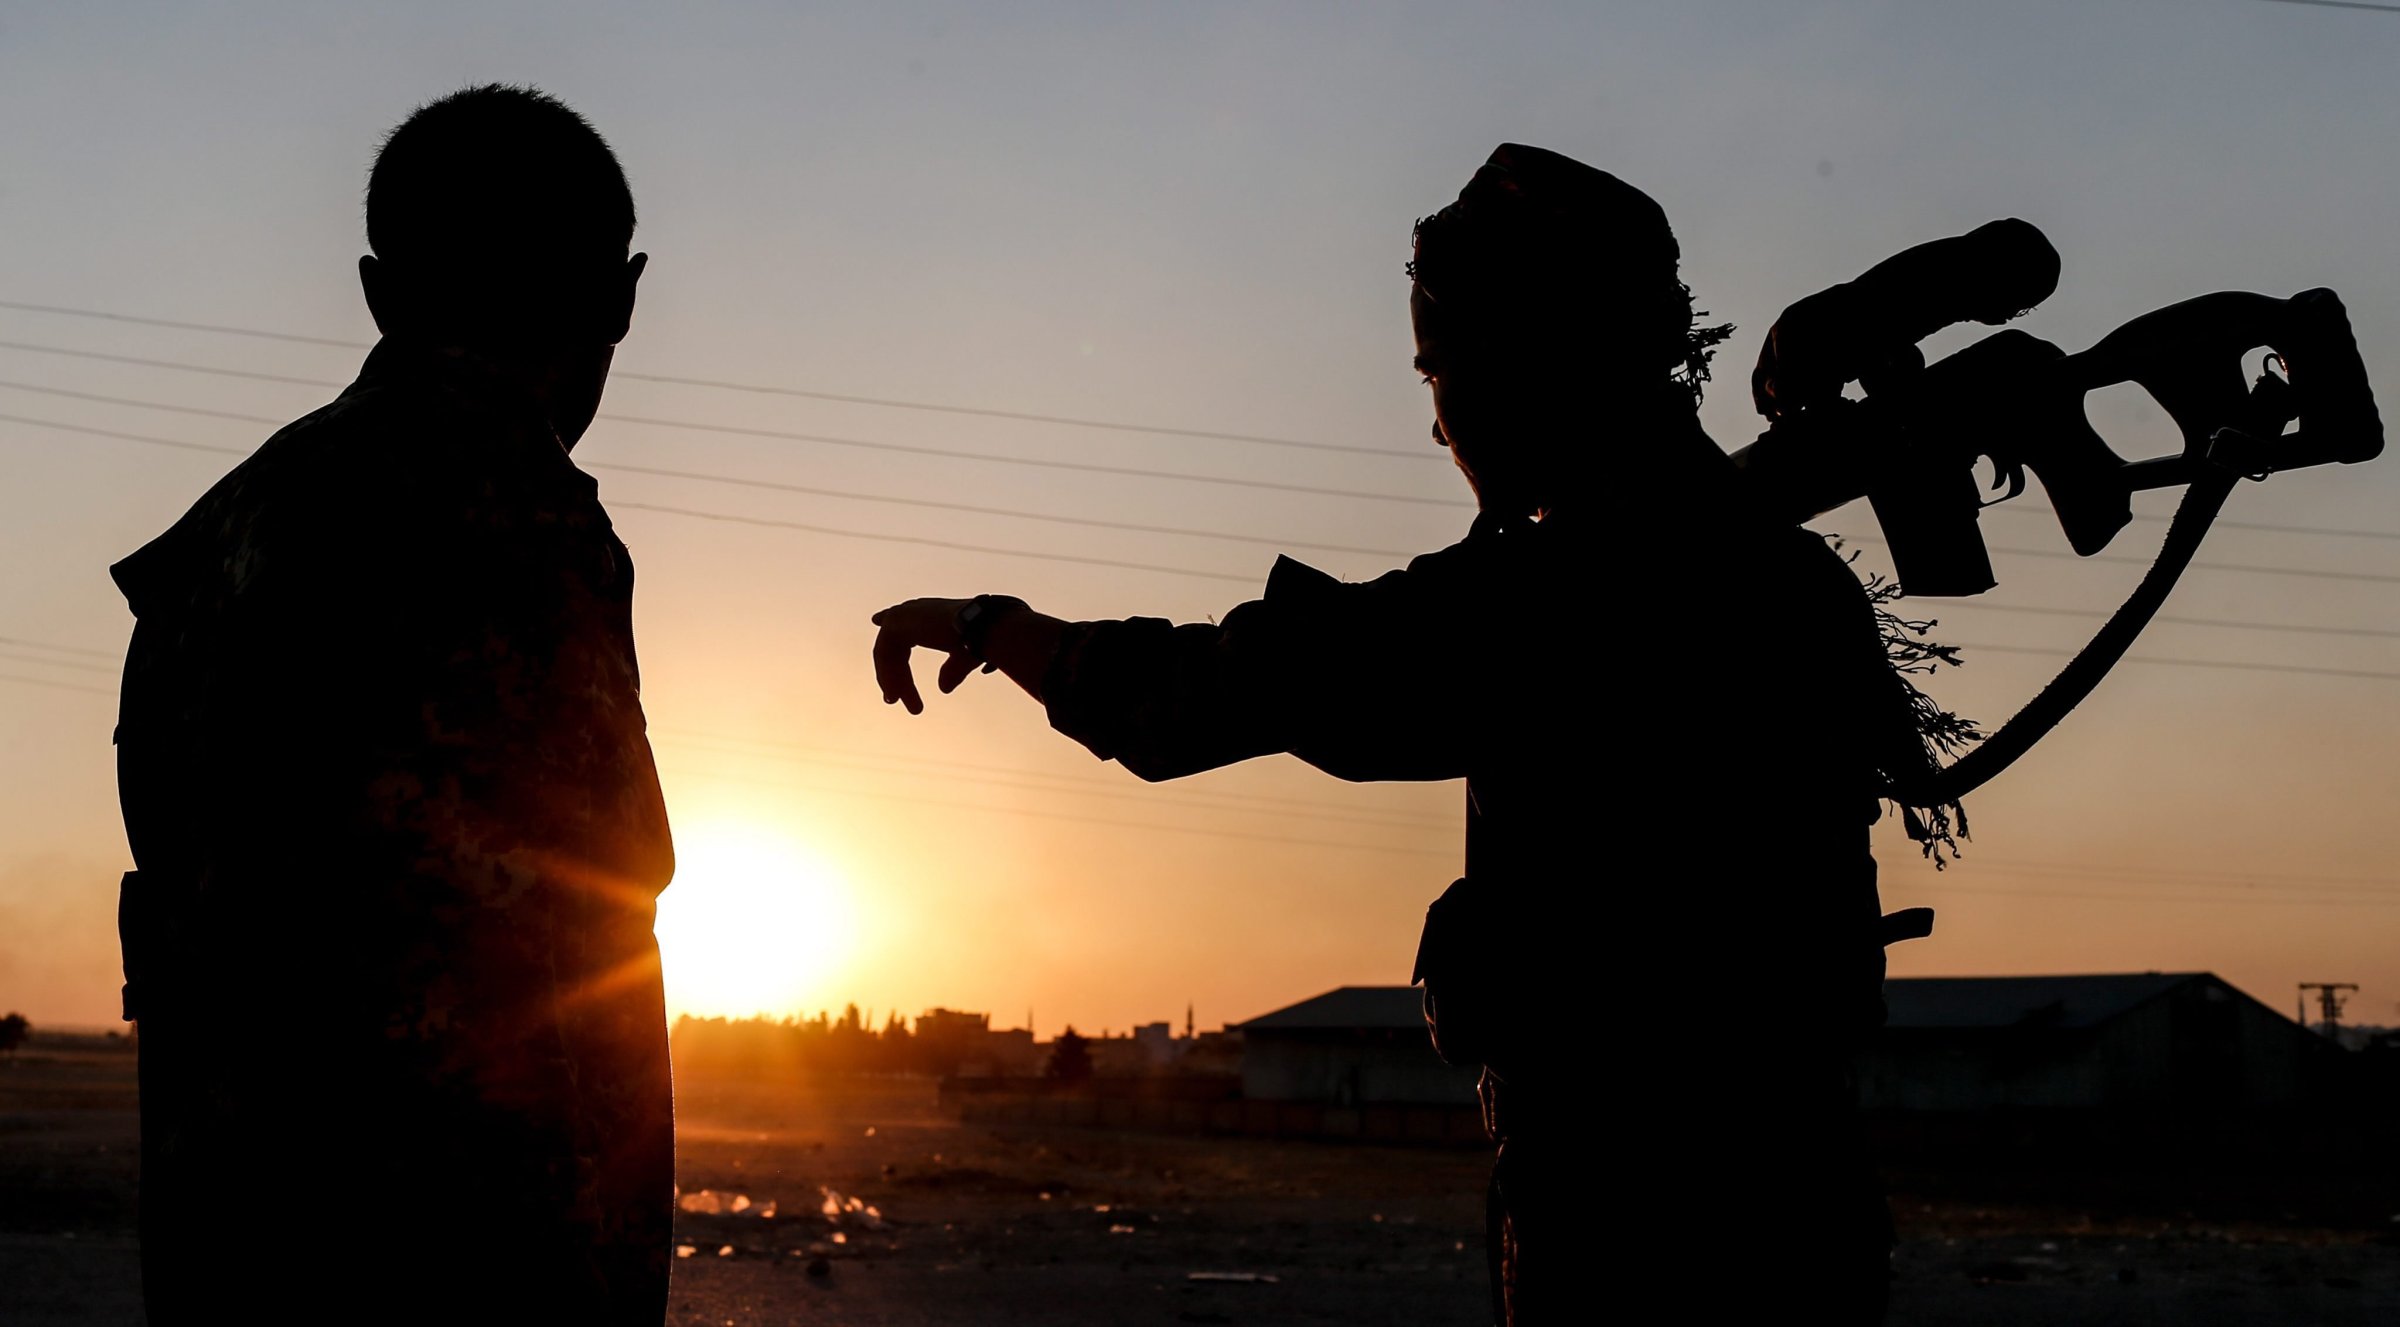 Members of Kurdish People Defense Units (YPG) guard during a sunset near Tel Abyad border gate in northern Syria on June 23, 2015.